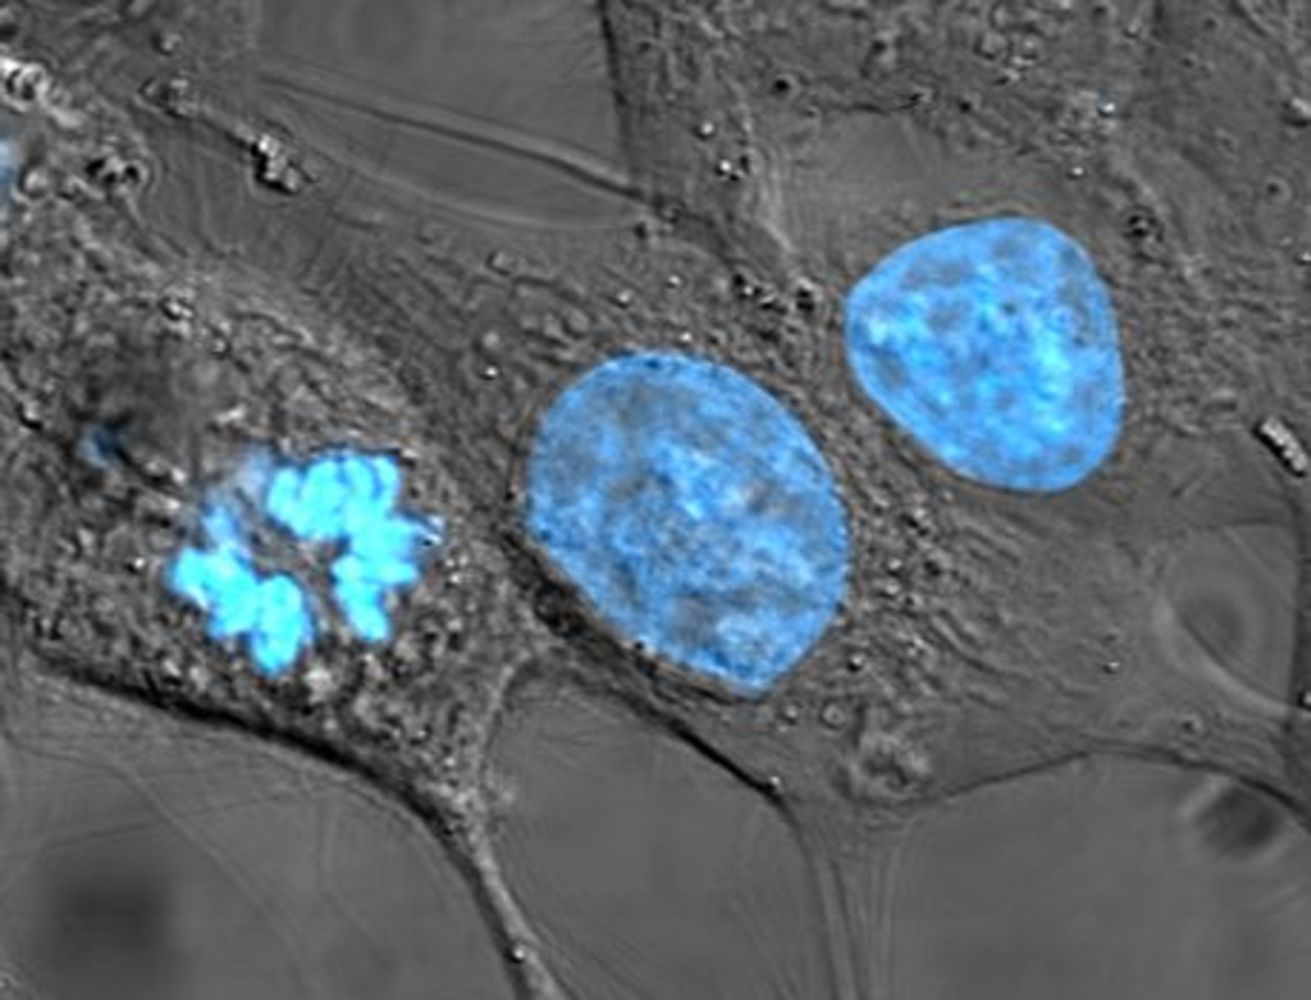 HeLa cells stained with Hoechst 33258 stain.